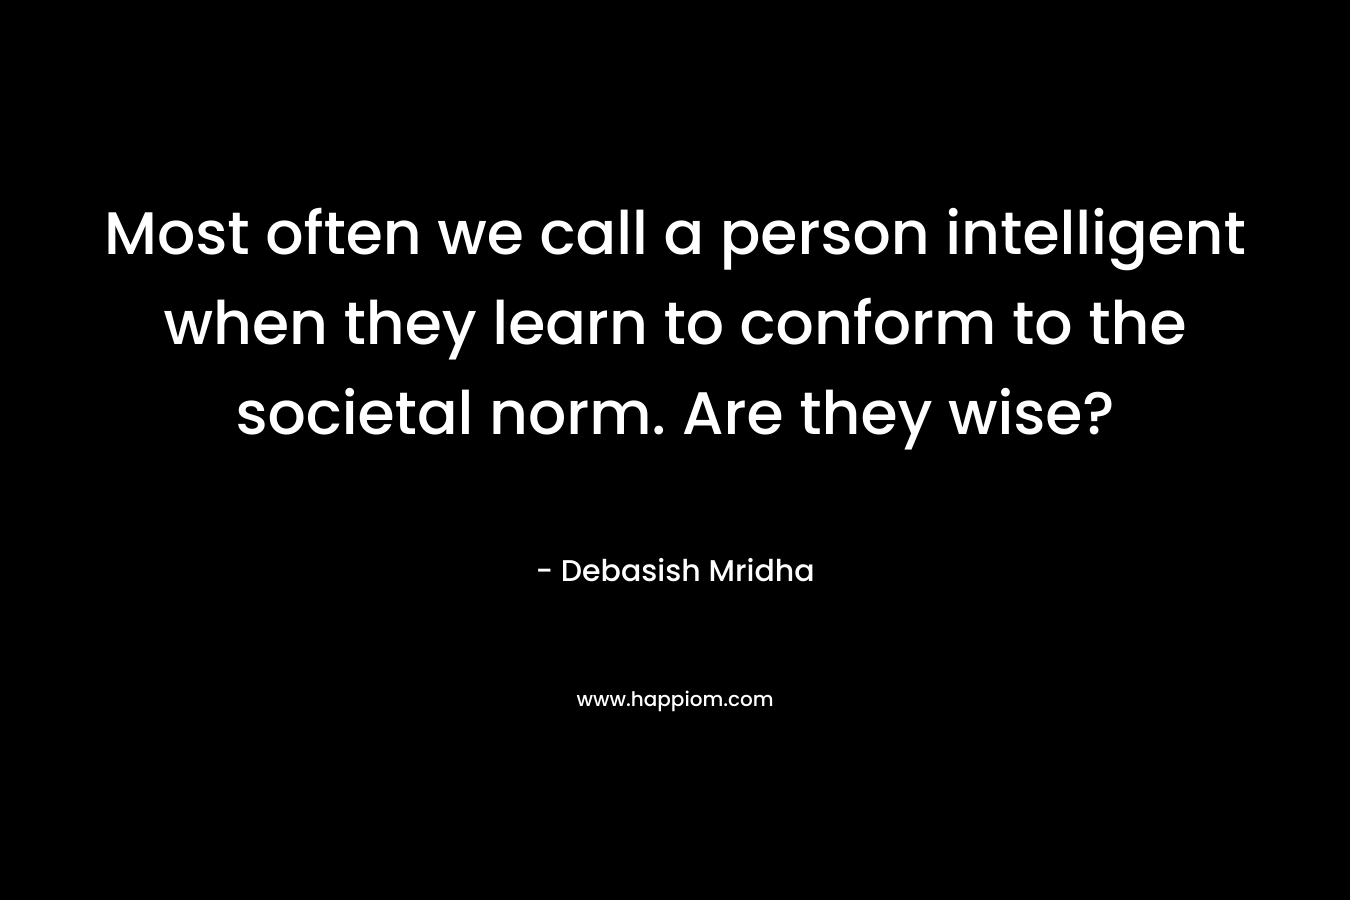 Most often we call a person intelligent when they learn to conform to the societal norm. Are they wise? – Debasish Mridha